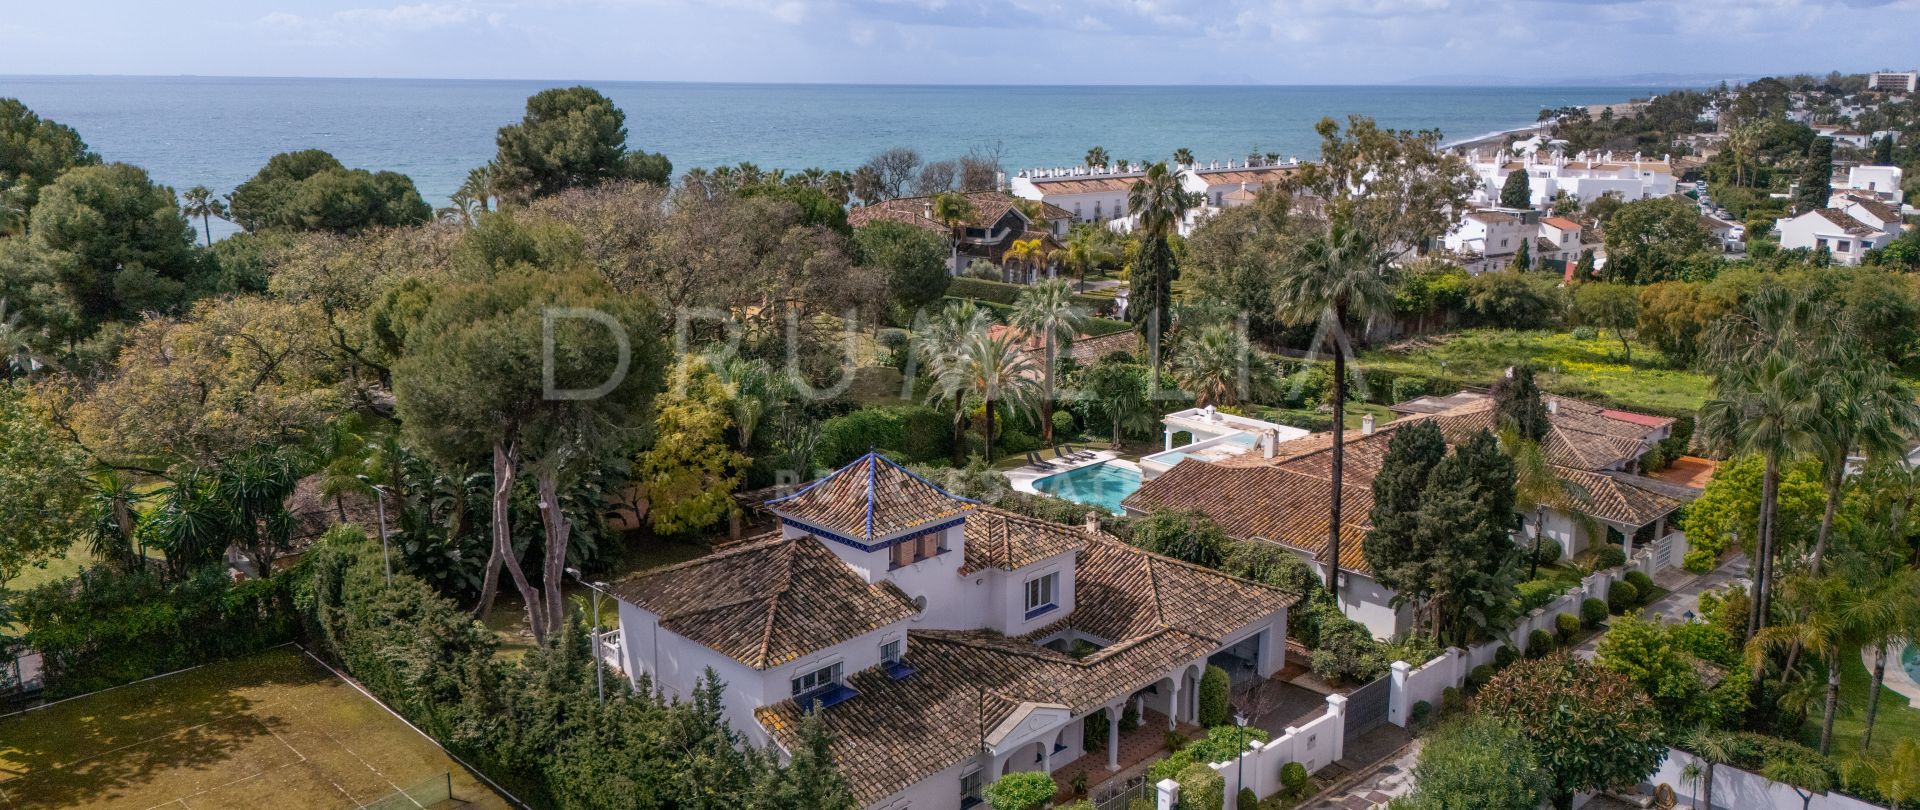 Charming andalusian villa within walking distance to the beach for sale in El Paraiso Barronal